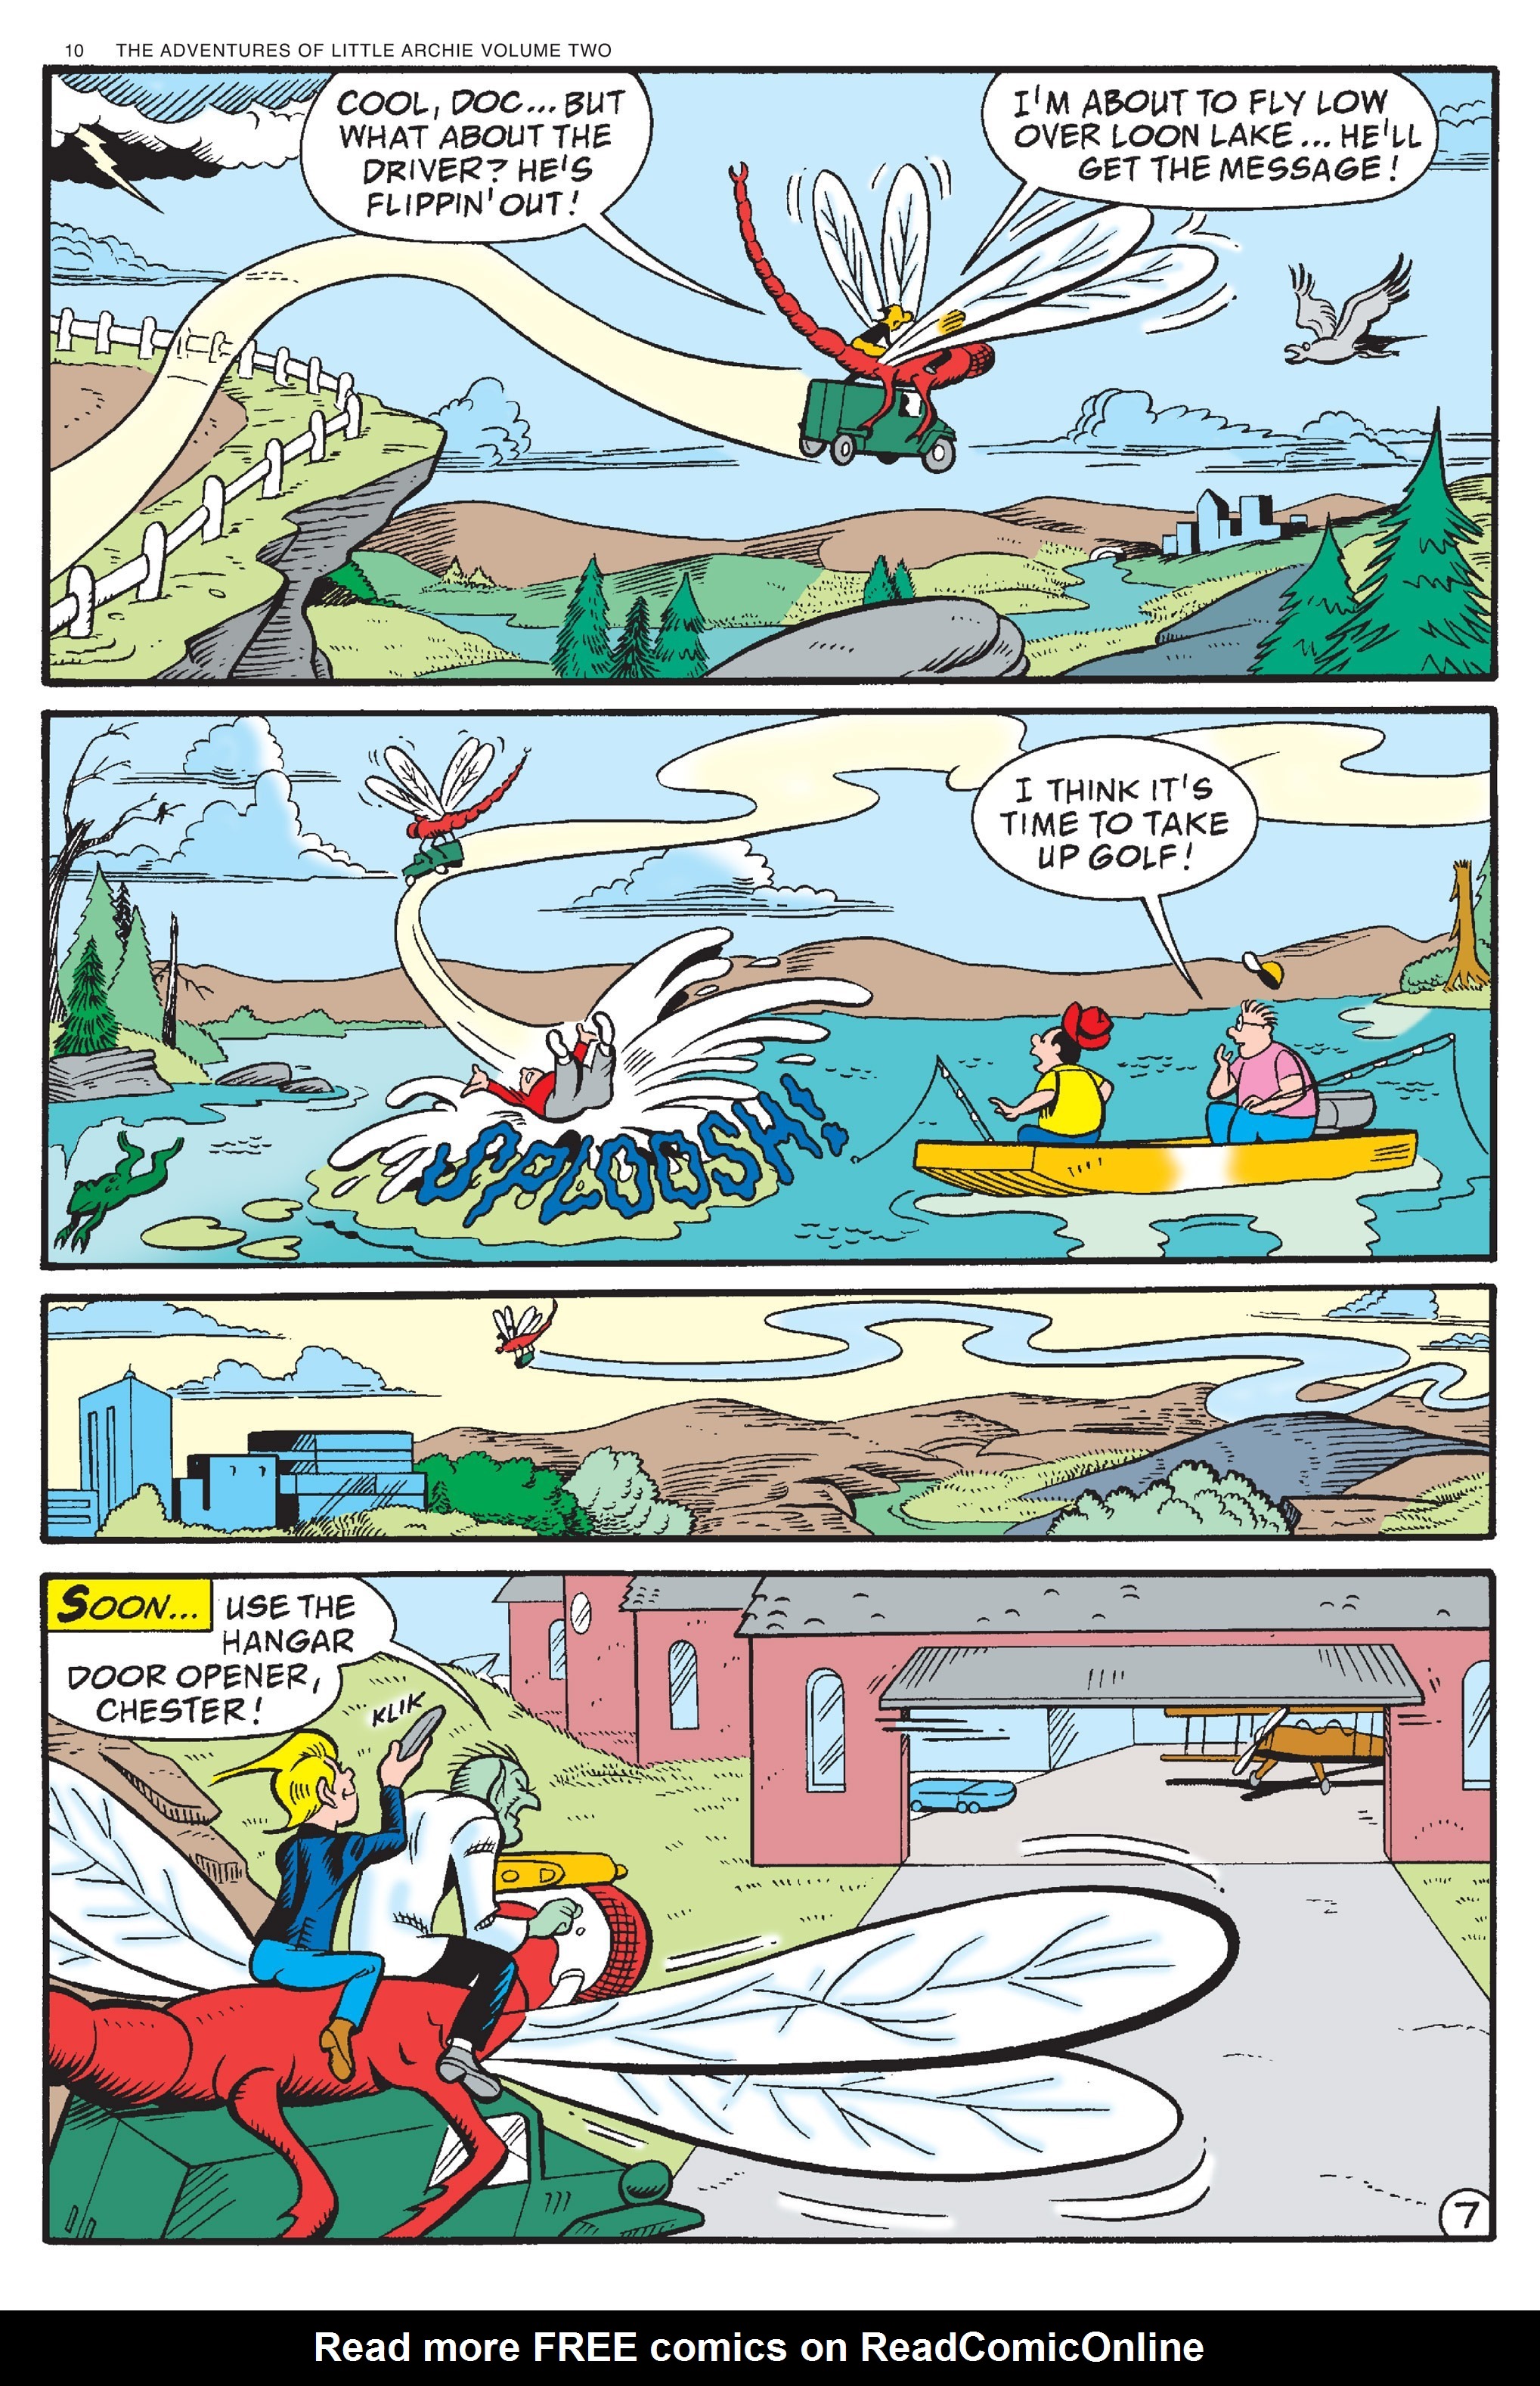 Read online Adventures of Little Archie comic -  Issue # TPB 2 - 11